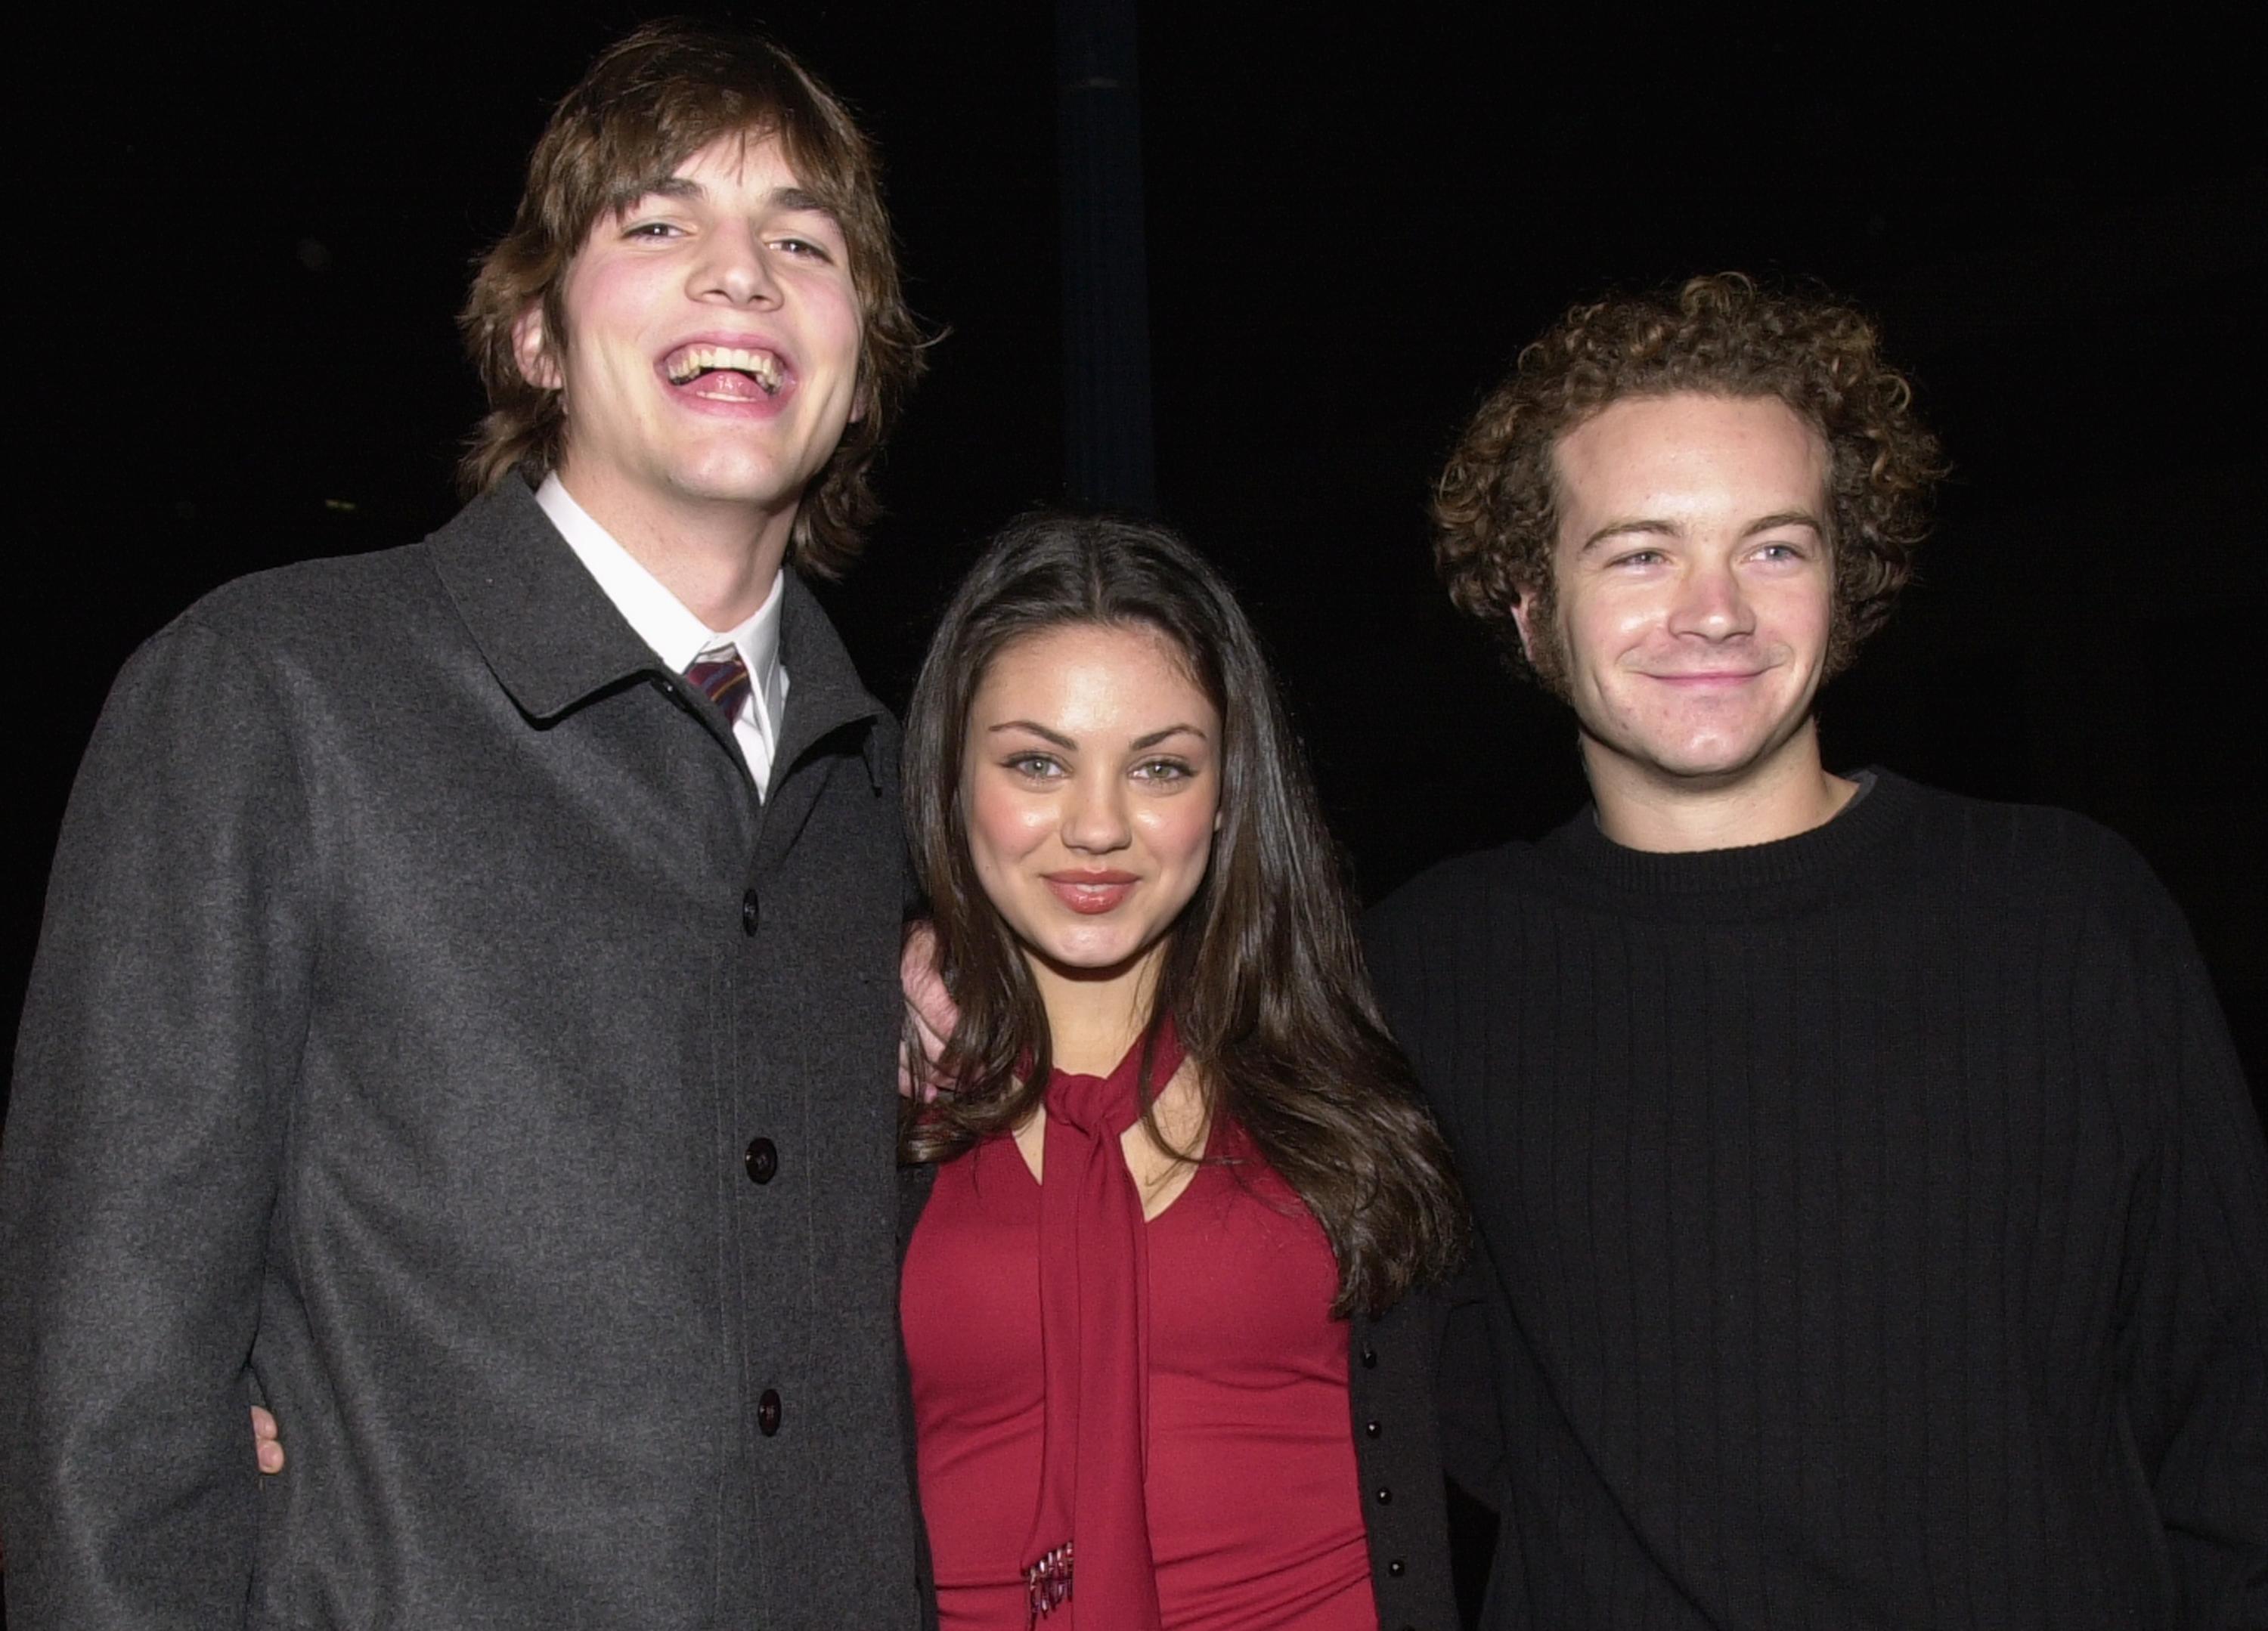 Ashton Kutcher, Mila Kunis, and Danny Masterson at the premiere of "Traffic" December 14, 2000 | Photo: GettyImages